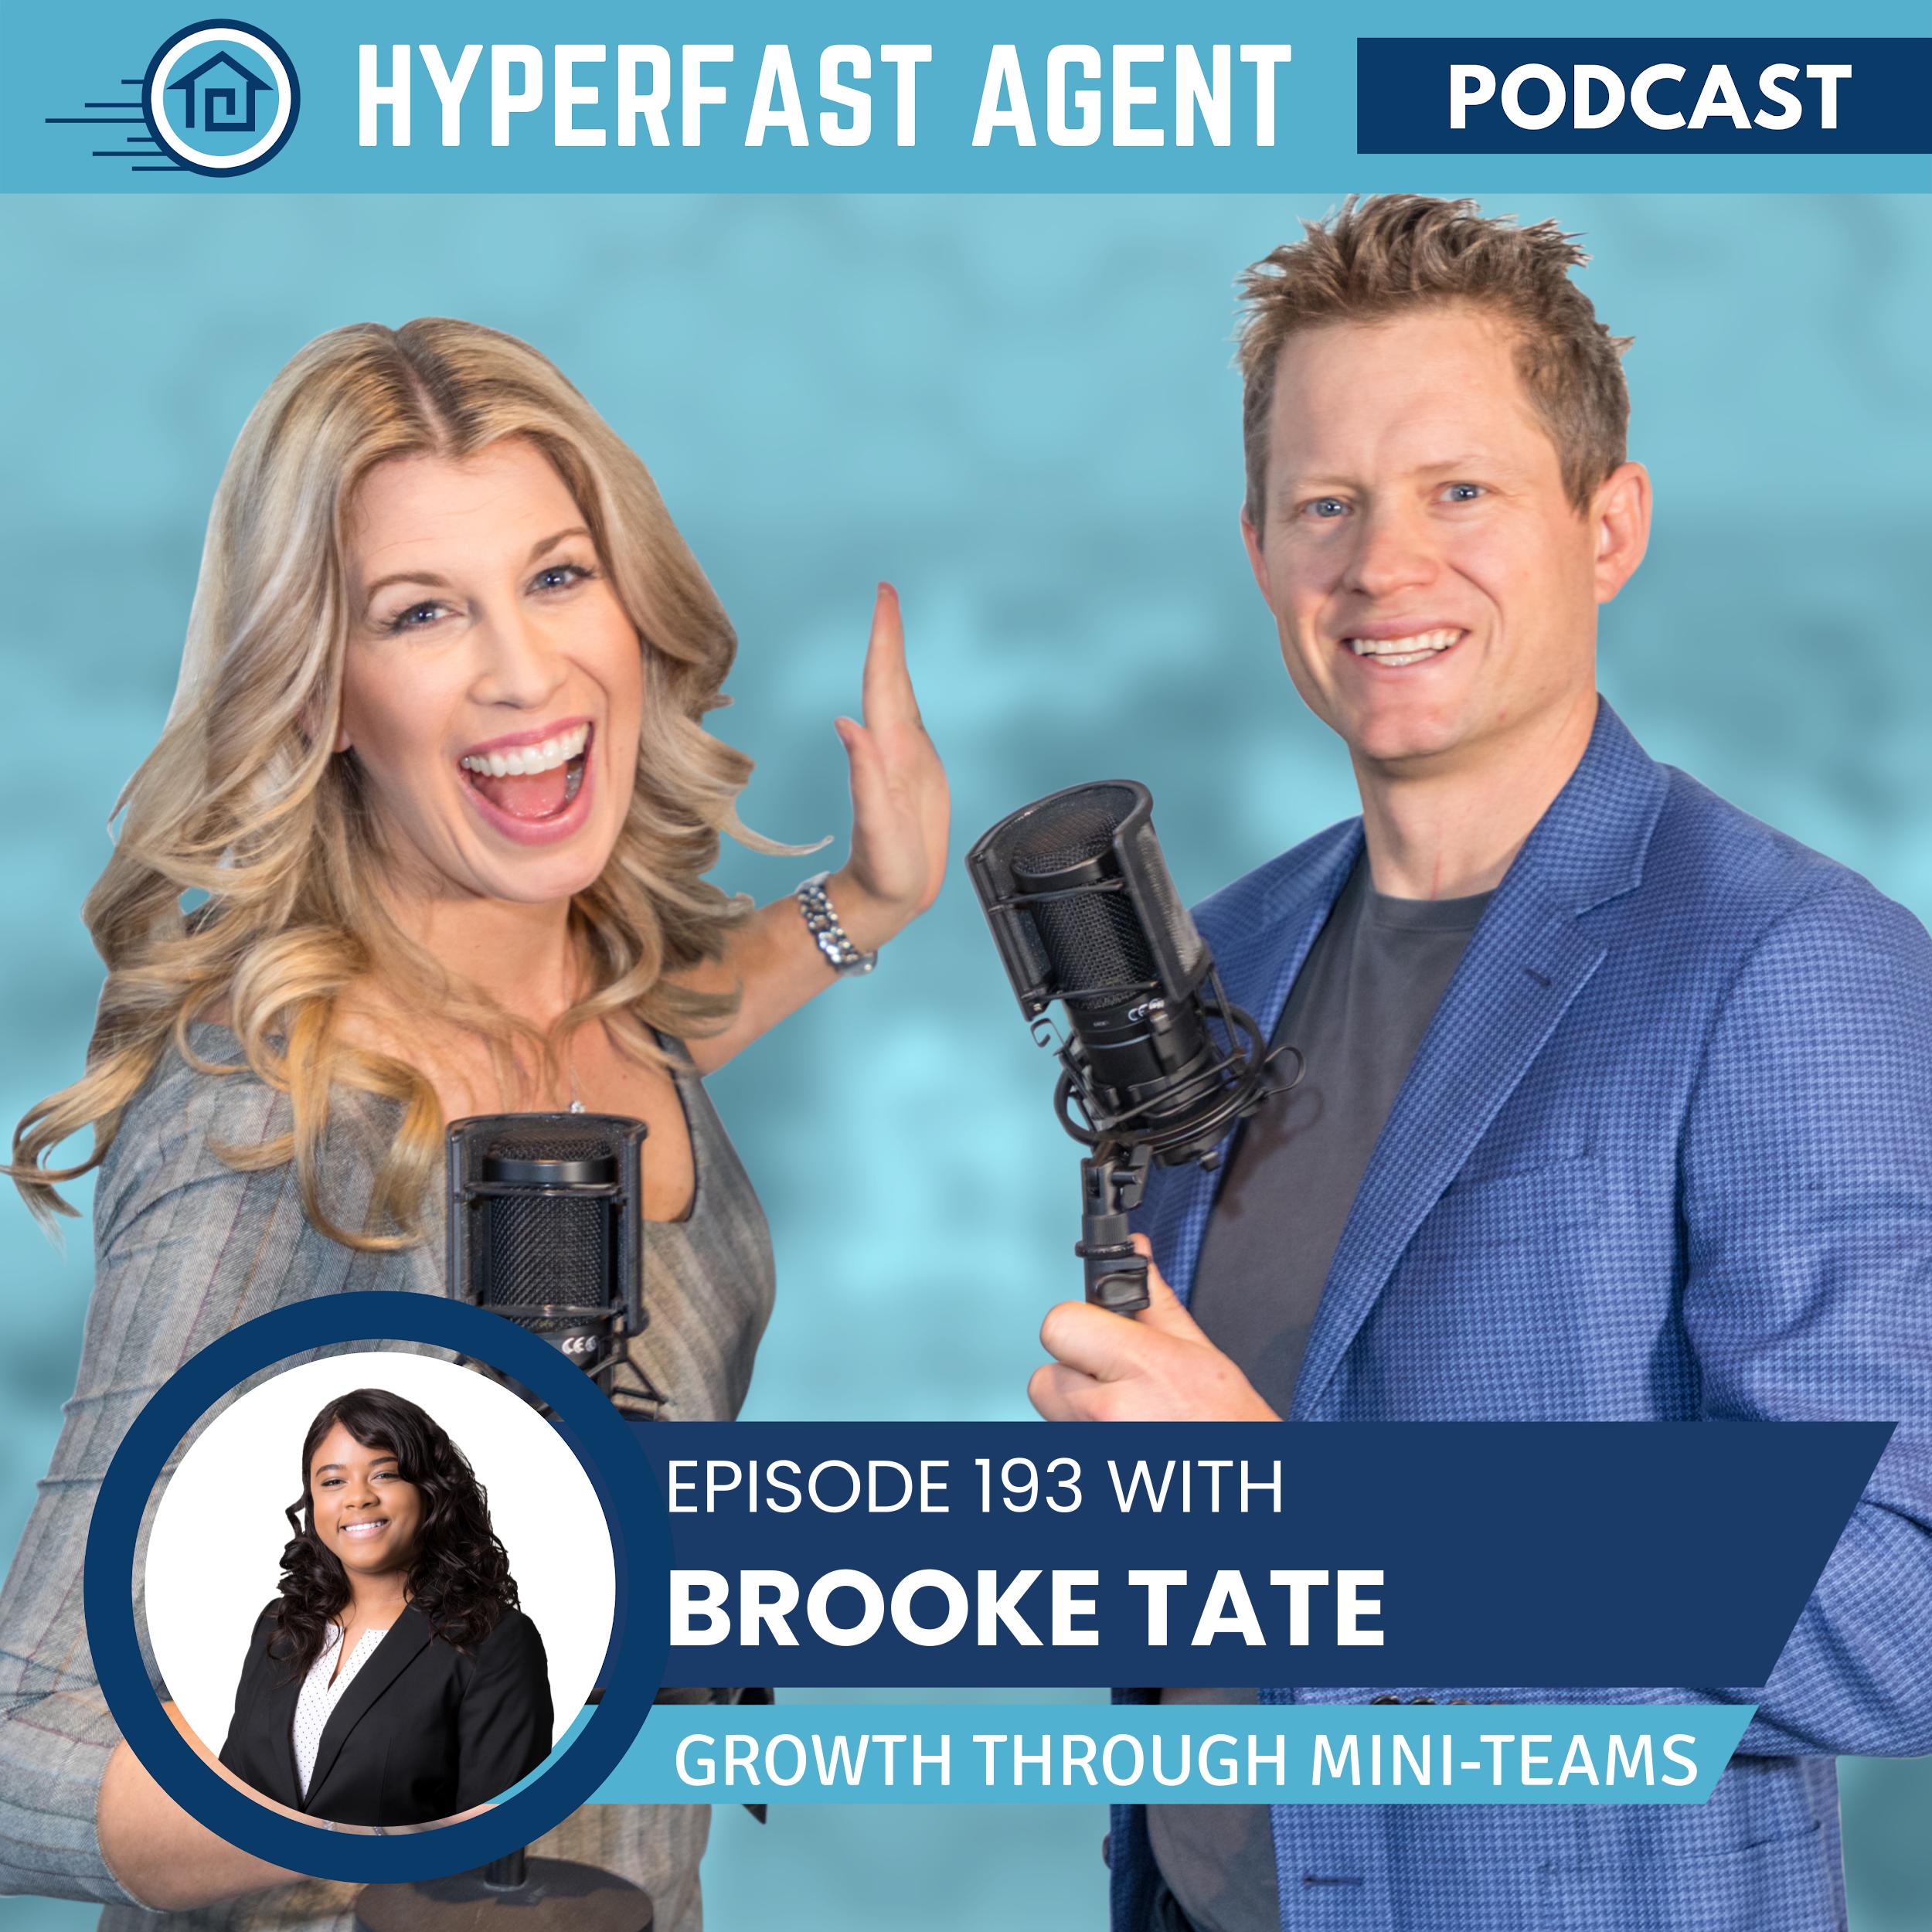 Episode #193 Business Growth Through Mini-Teams with Brooke Tate